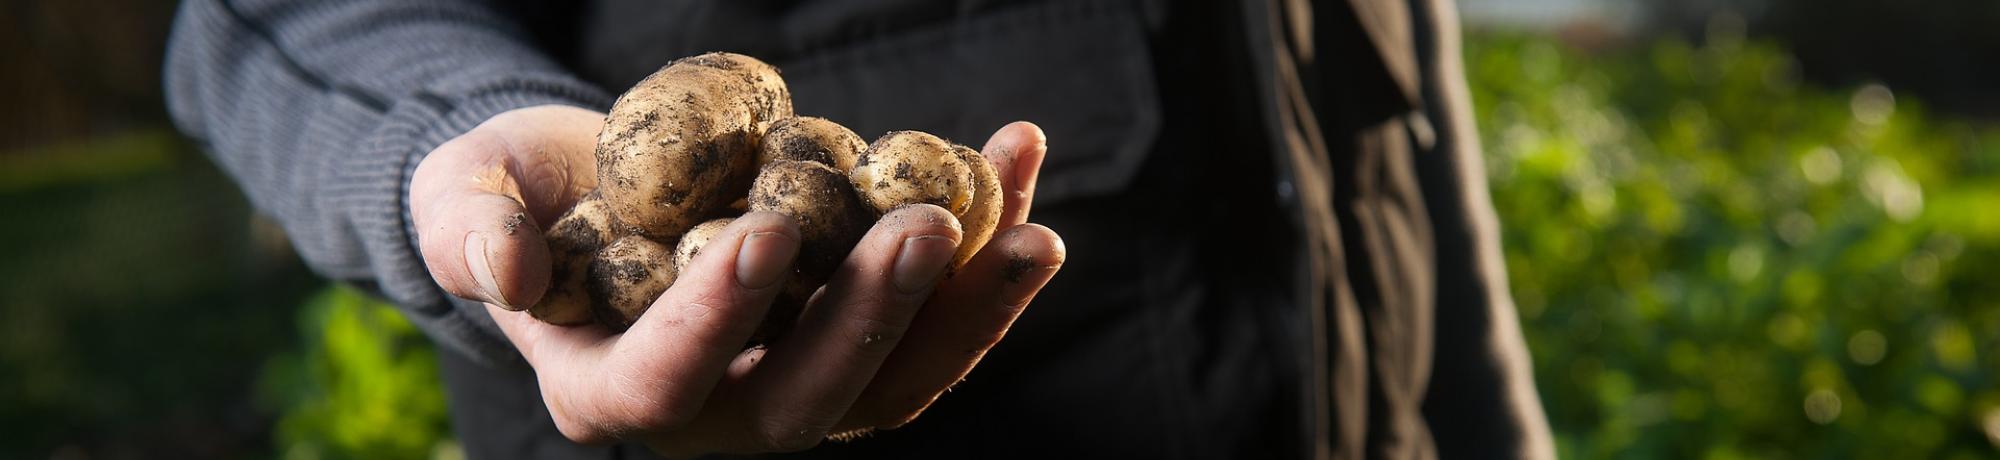 A close up of a farmer holding harvested potatoes